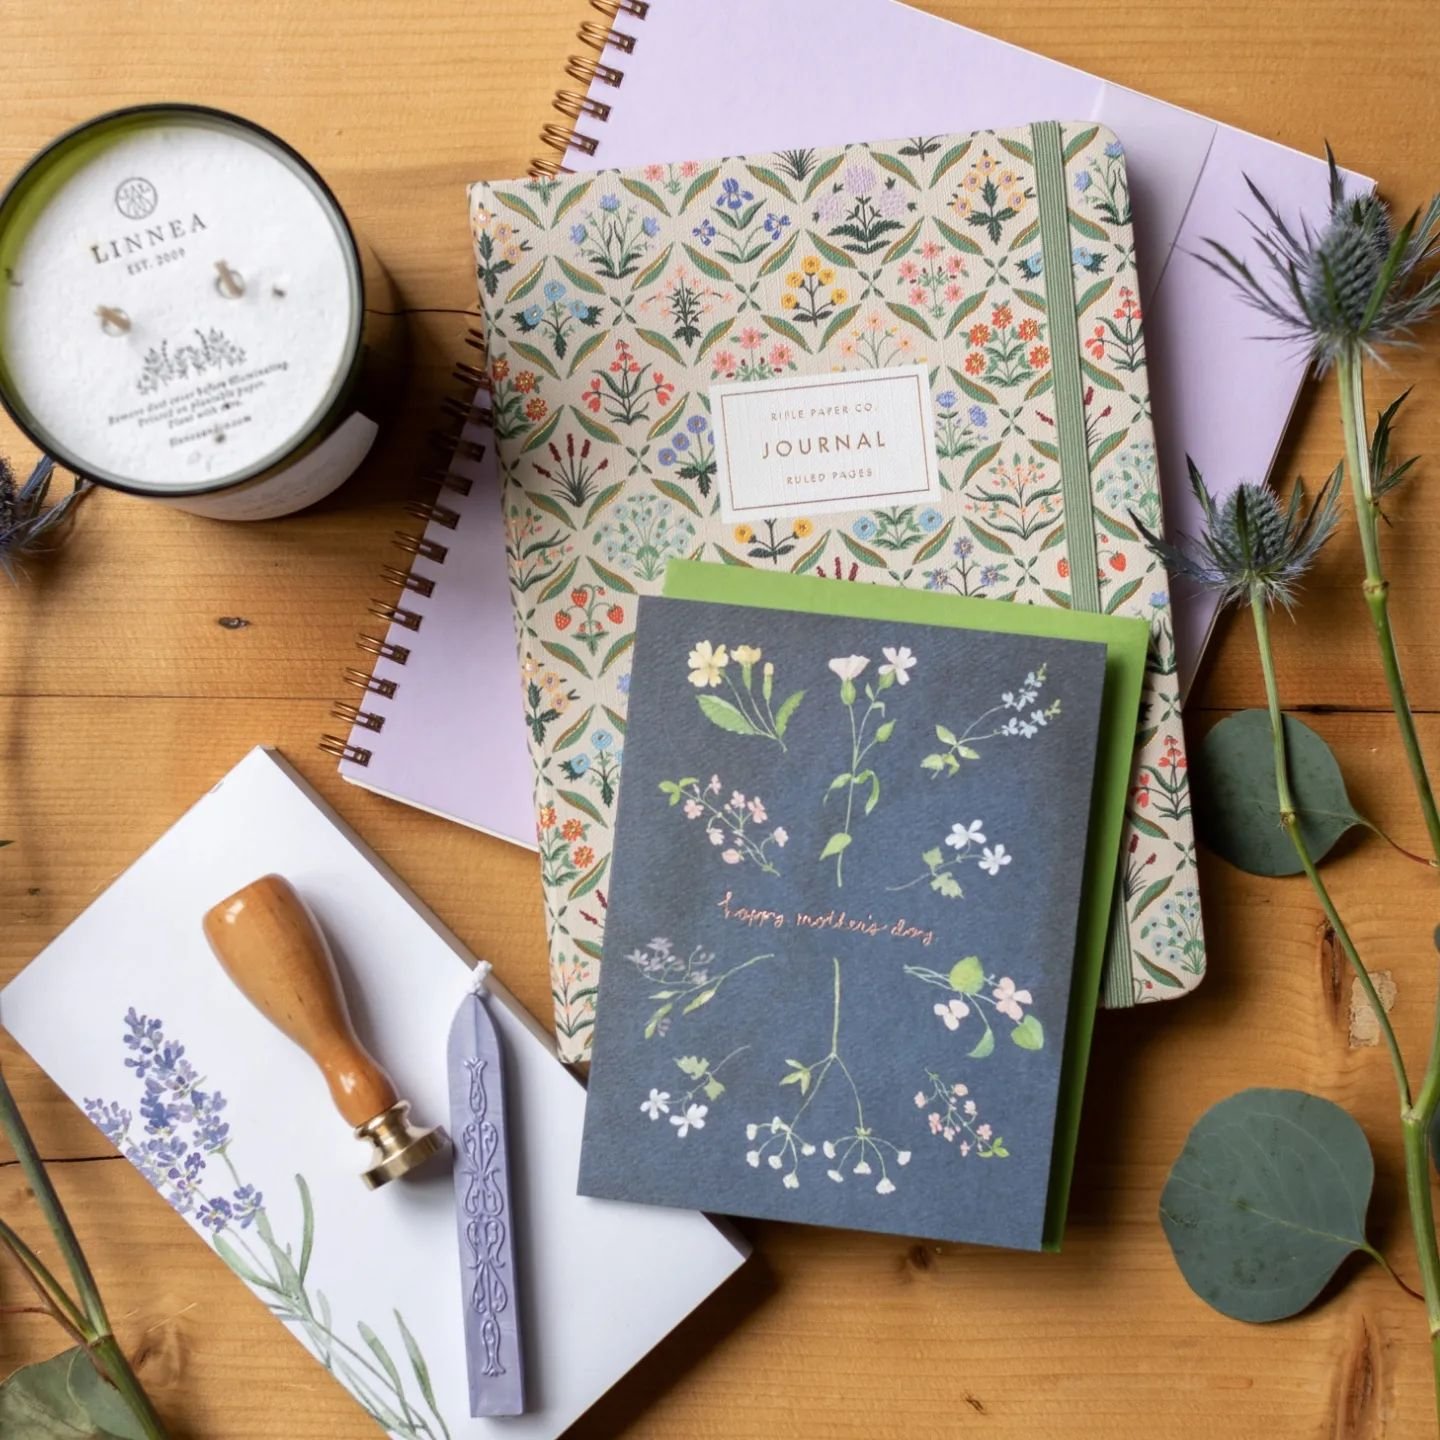 Mother's Day is this Sunday! Celebrate the loved ones in your life with a heartfelt card, gift, or experience of testing out our incredible selection of fountain pens. Shop in-store, or online for in-store pickup to save time. And don't forget, @penr